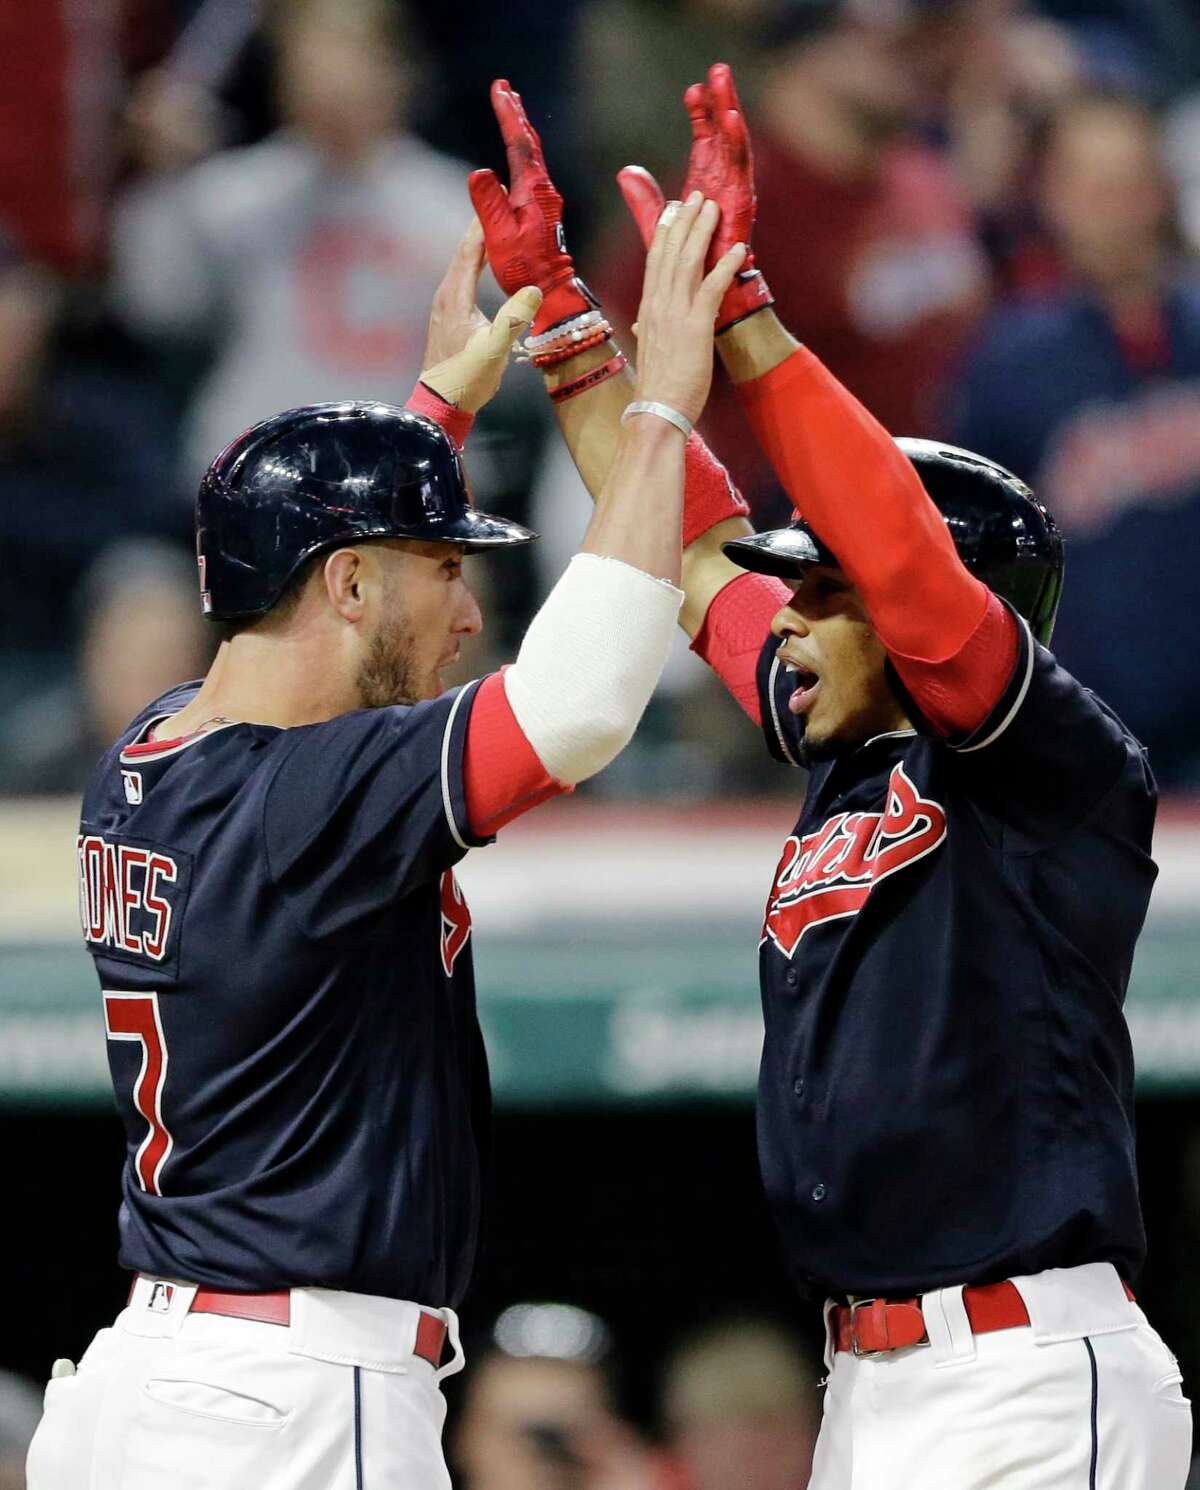 Cleveland Indians' Francisco Lindor, right, is congratulated by Yan Gomes after the scored on Lindor's two-run home run off Houston Astros relief pitcher Chris Devenski during the seventh inning of a baseball game, Thursday, April 27, 2017, in Cleveland. (AP Photo/Tony Dejak)